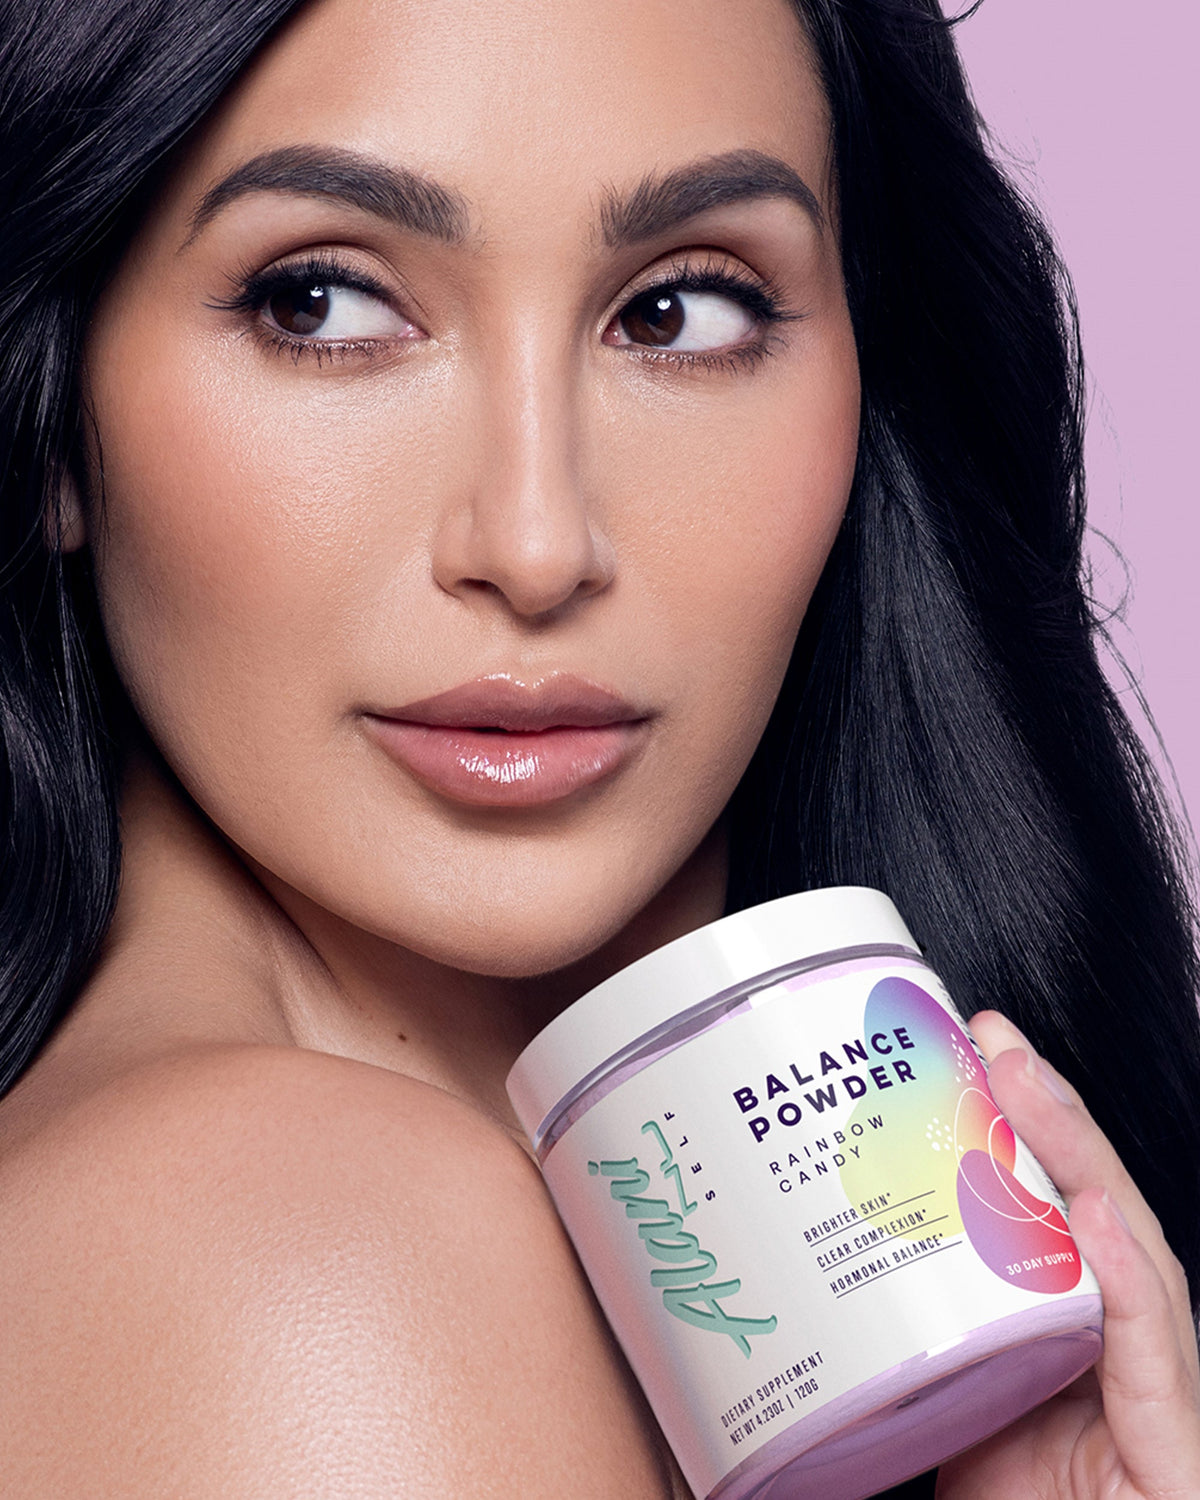 A woman holding a container of Alani Nu Balance Powder in Rainbow Candy flavor.